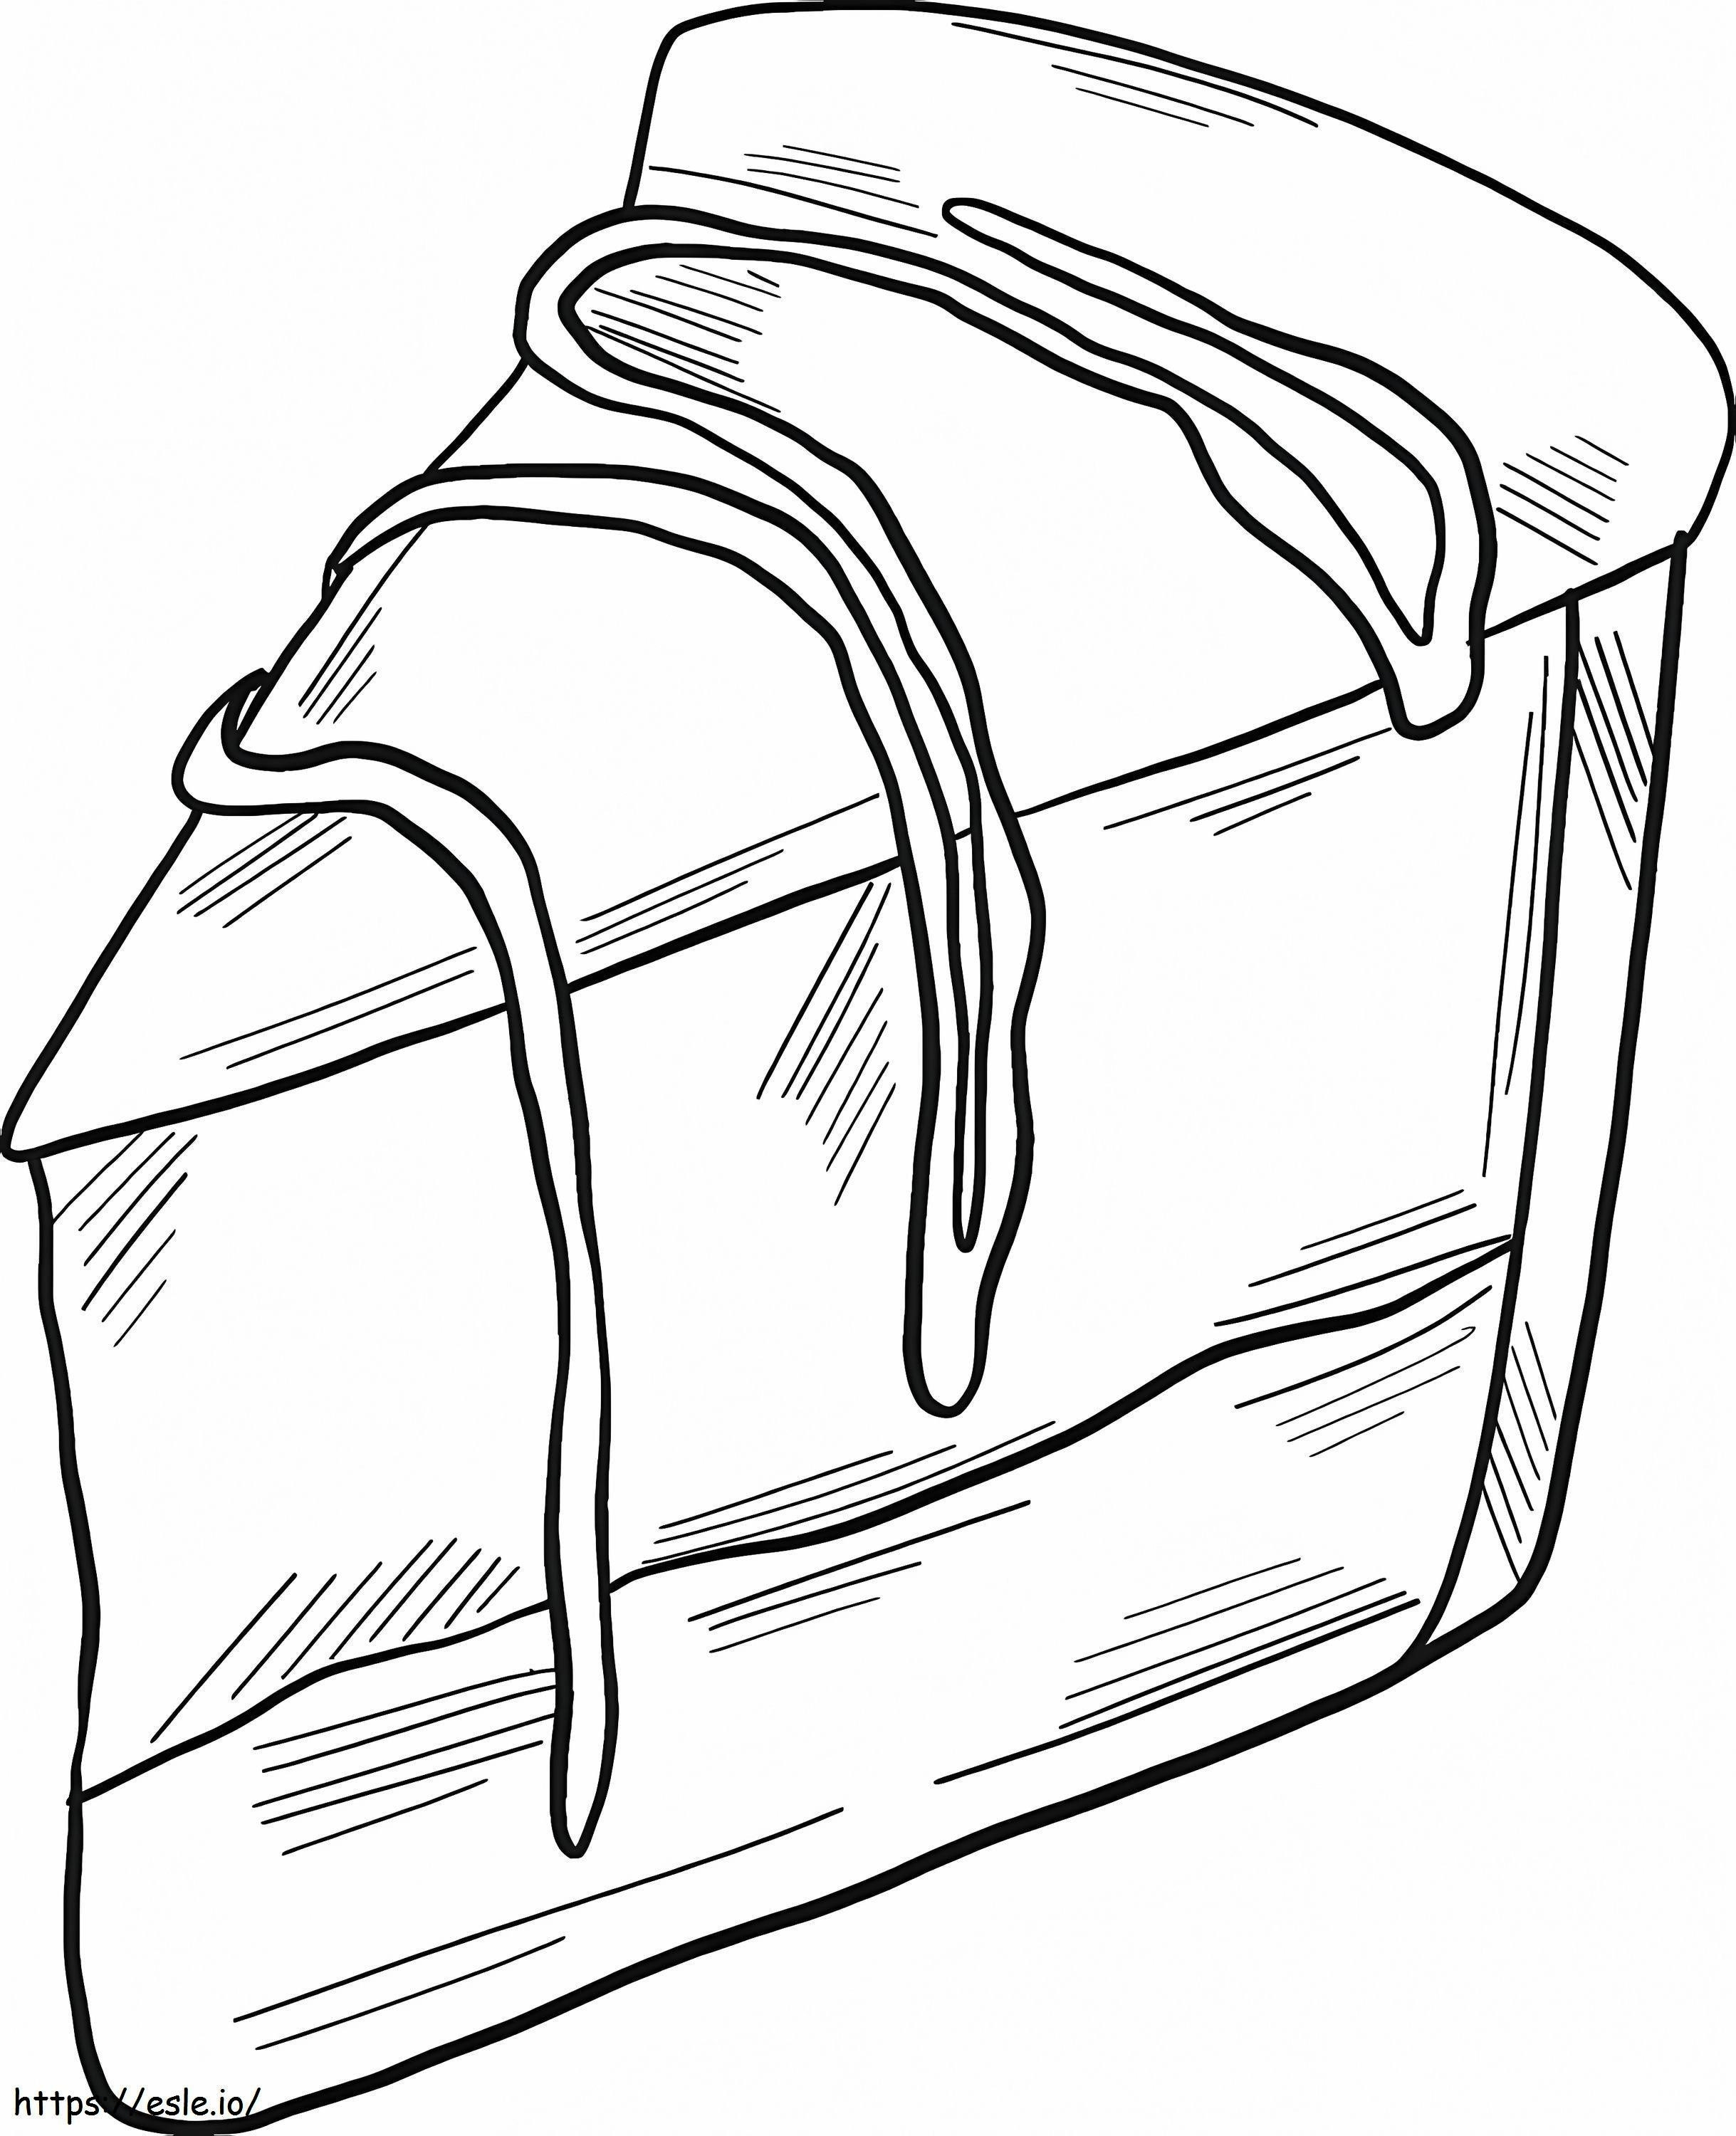 Piece Of Cake Printable coloring page